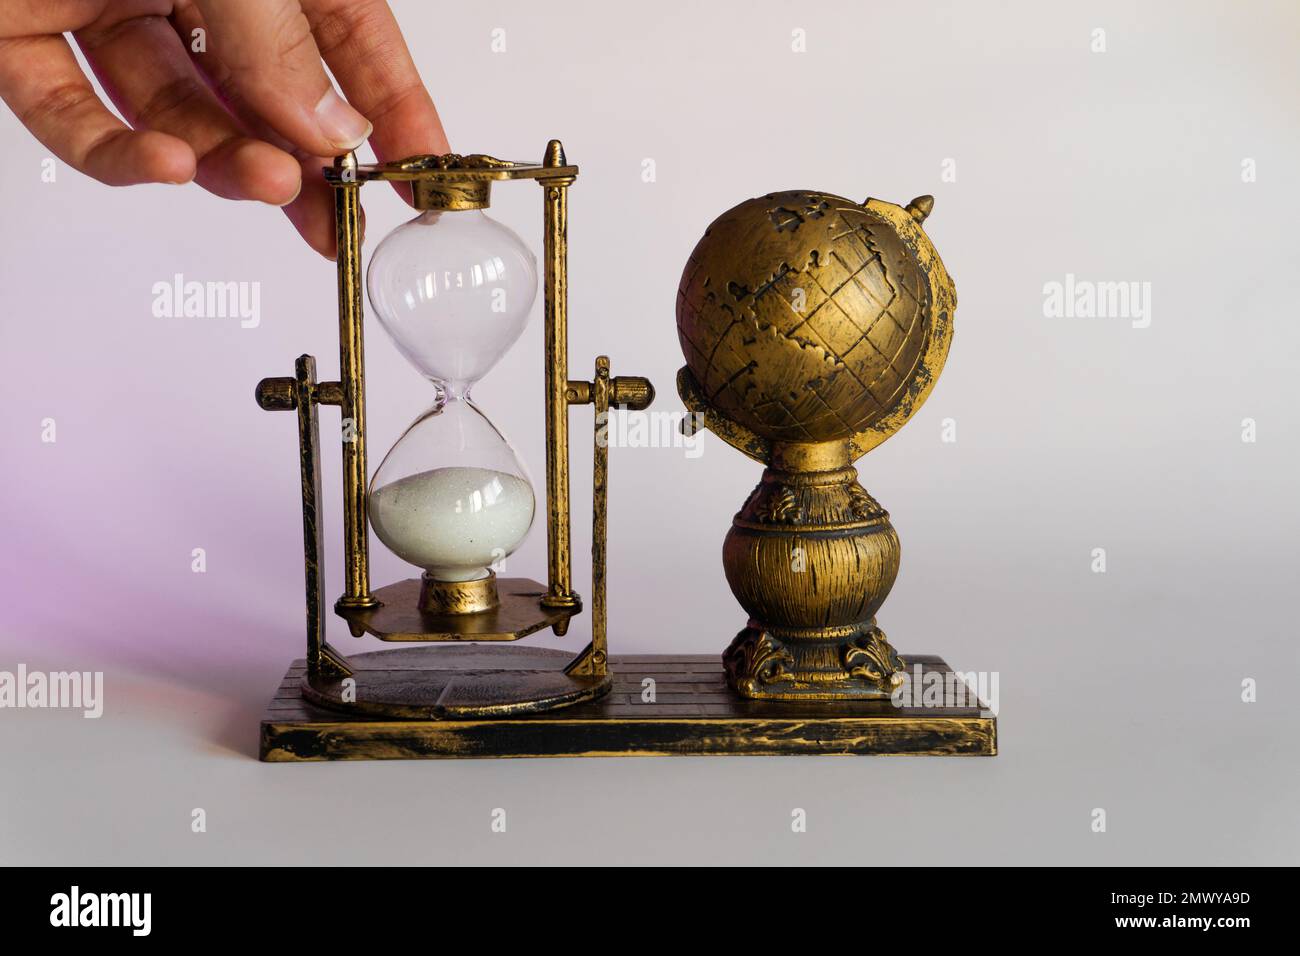 Hourglass held in hand. Earth and Hourglass. The symbolism of hourglasses. Stock Photo